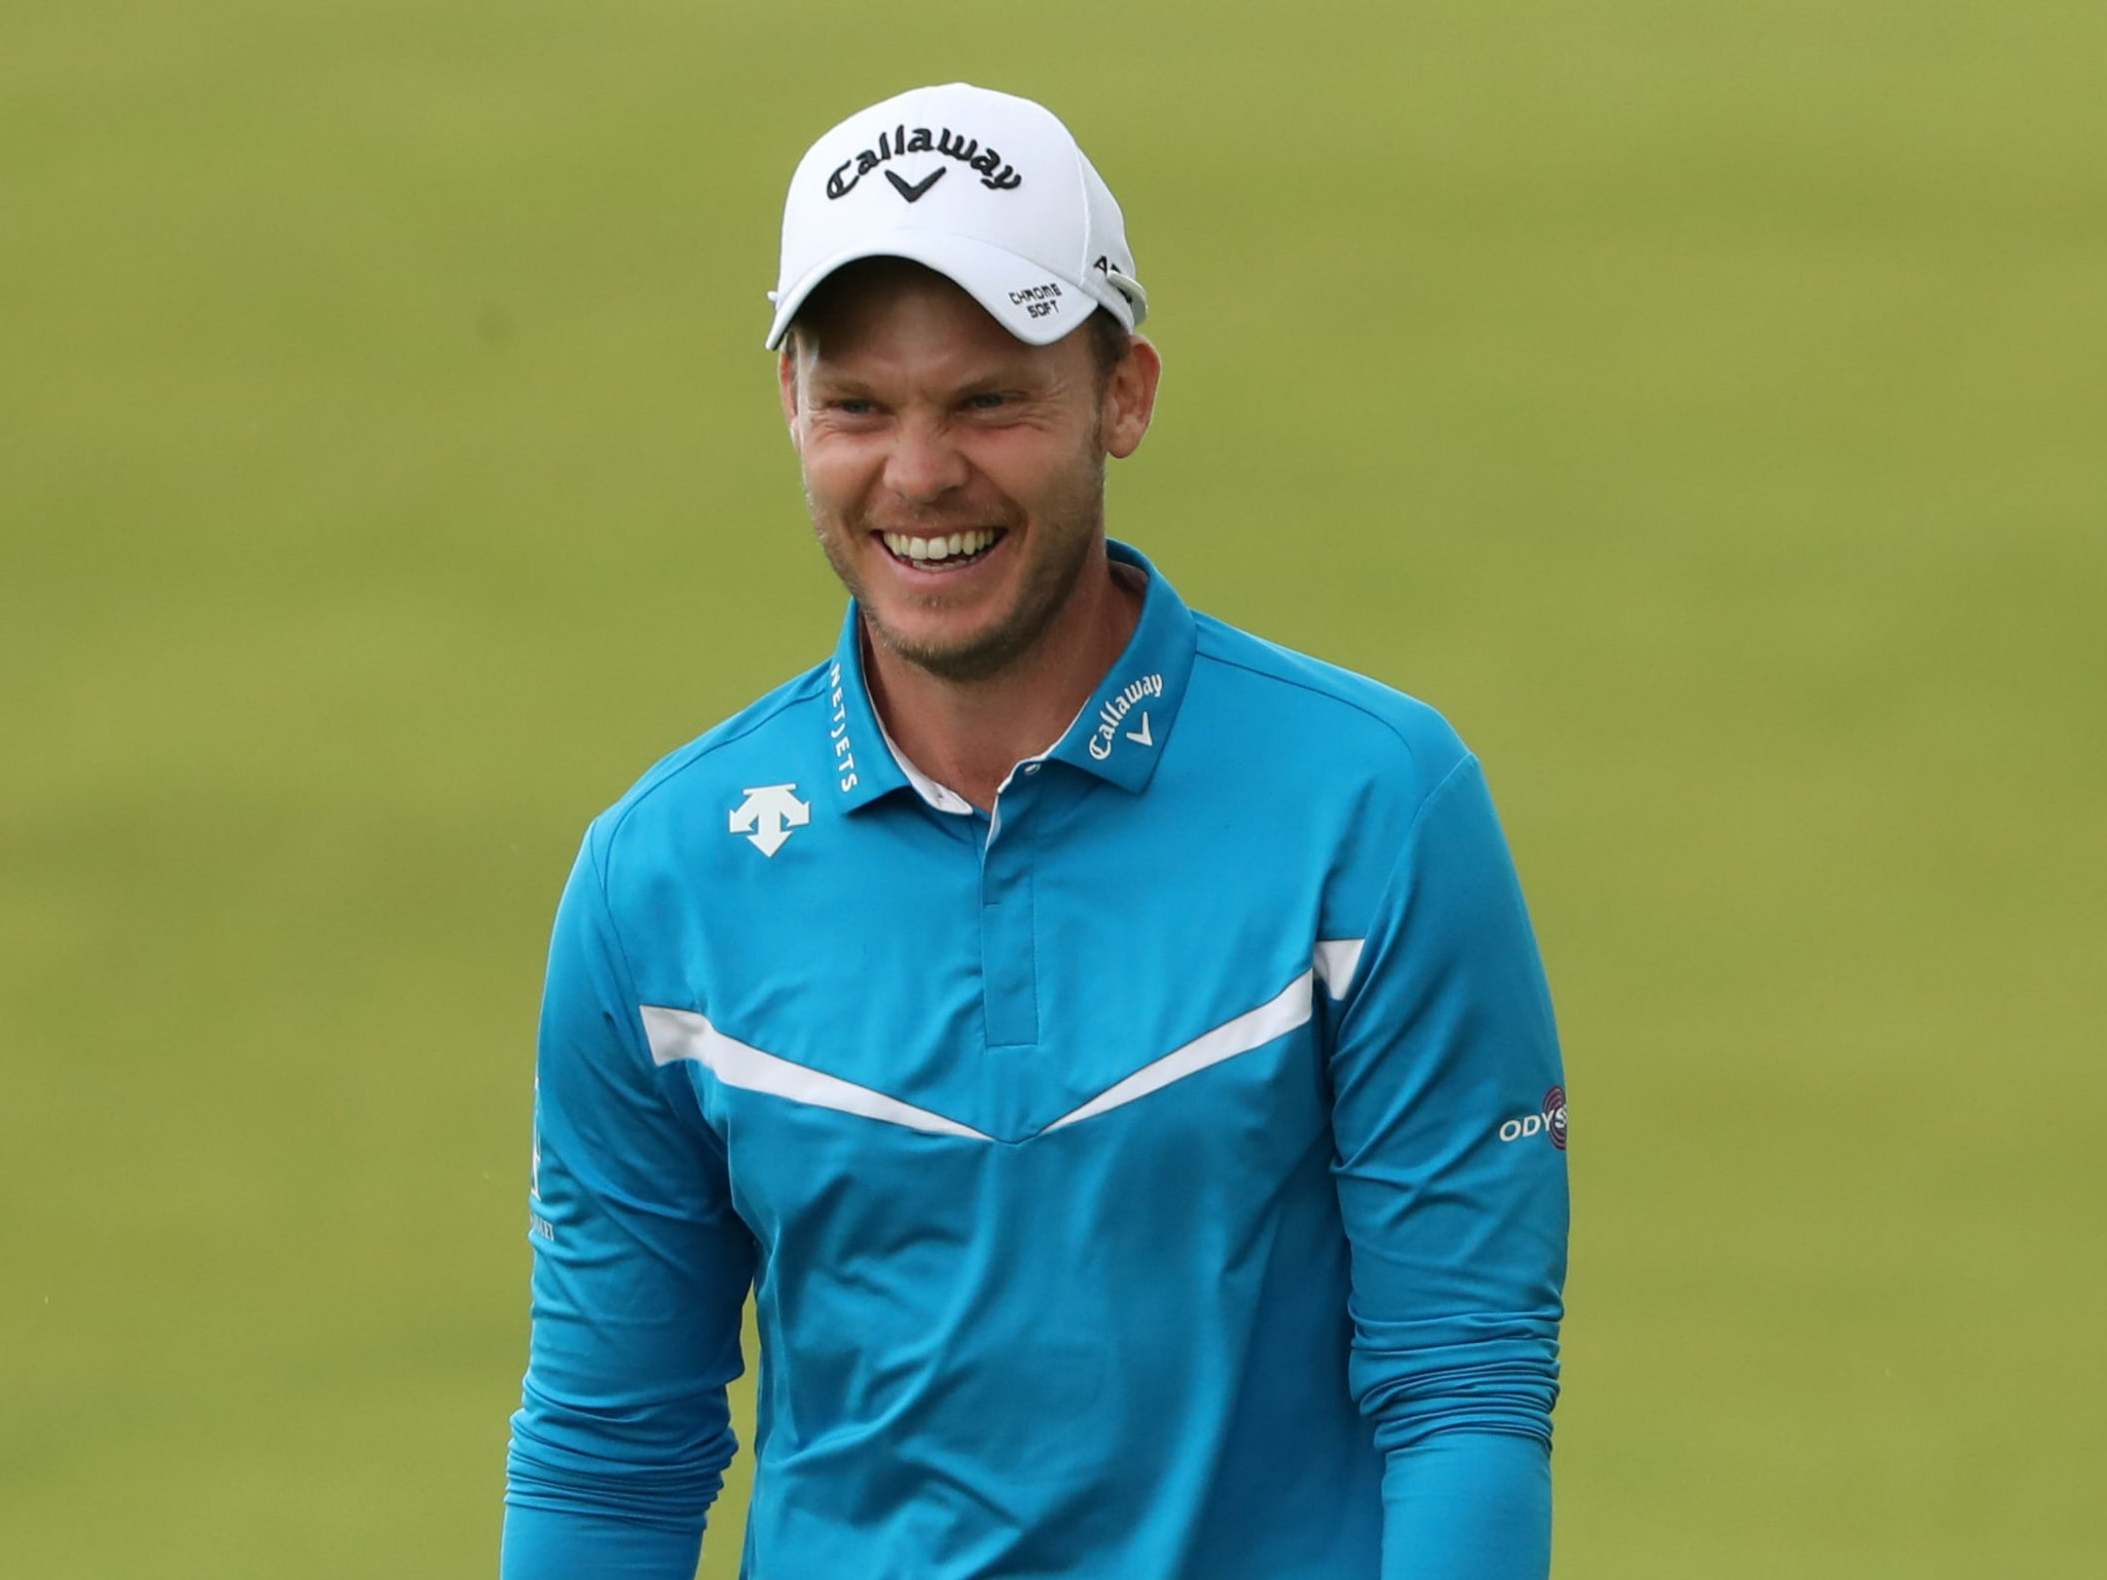 Danny Willett recorded a six-under-par 65 on Saturday to move into Open contention